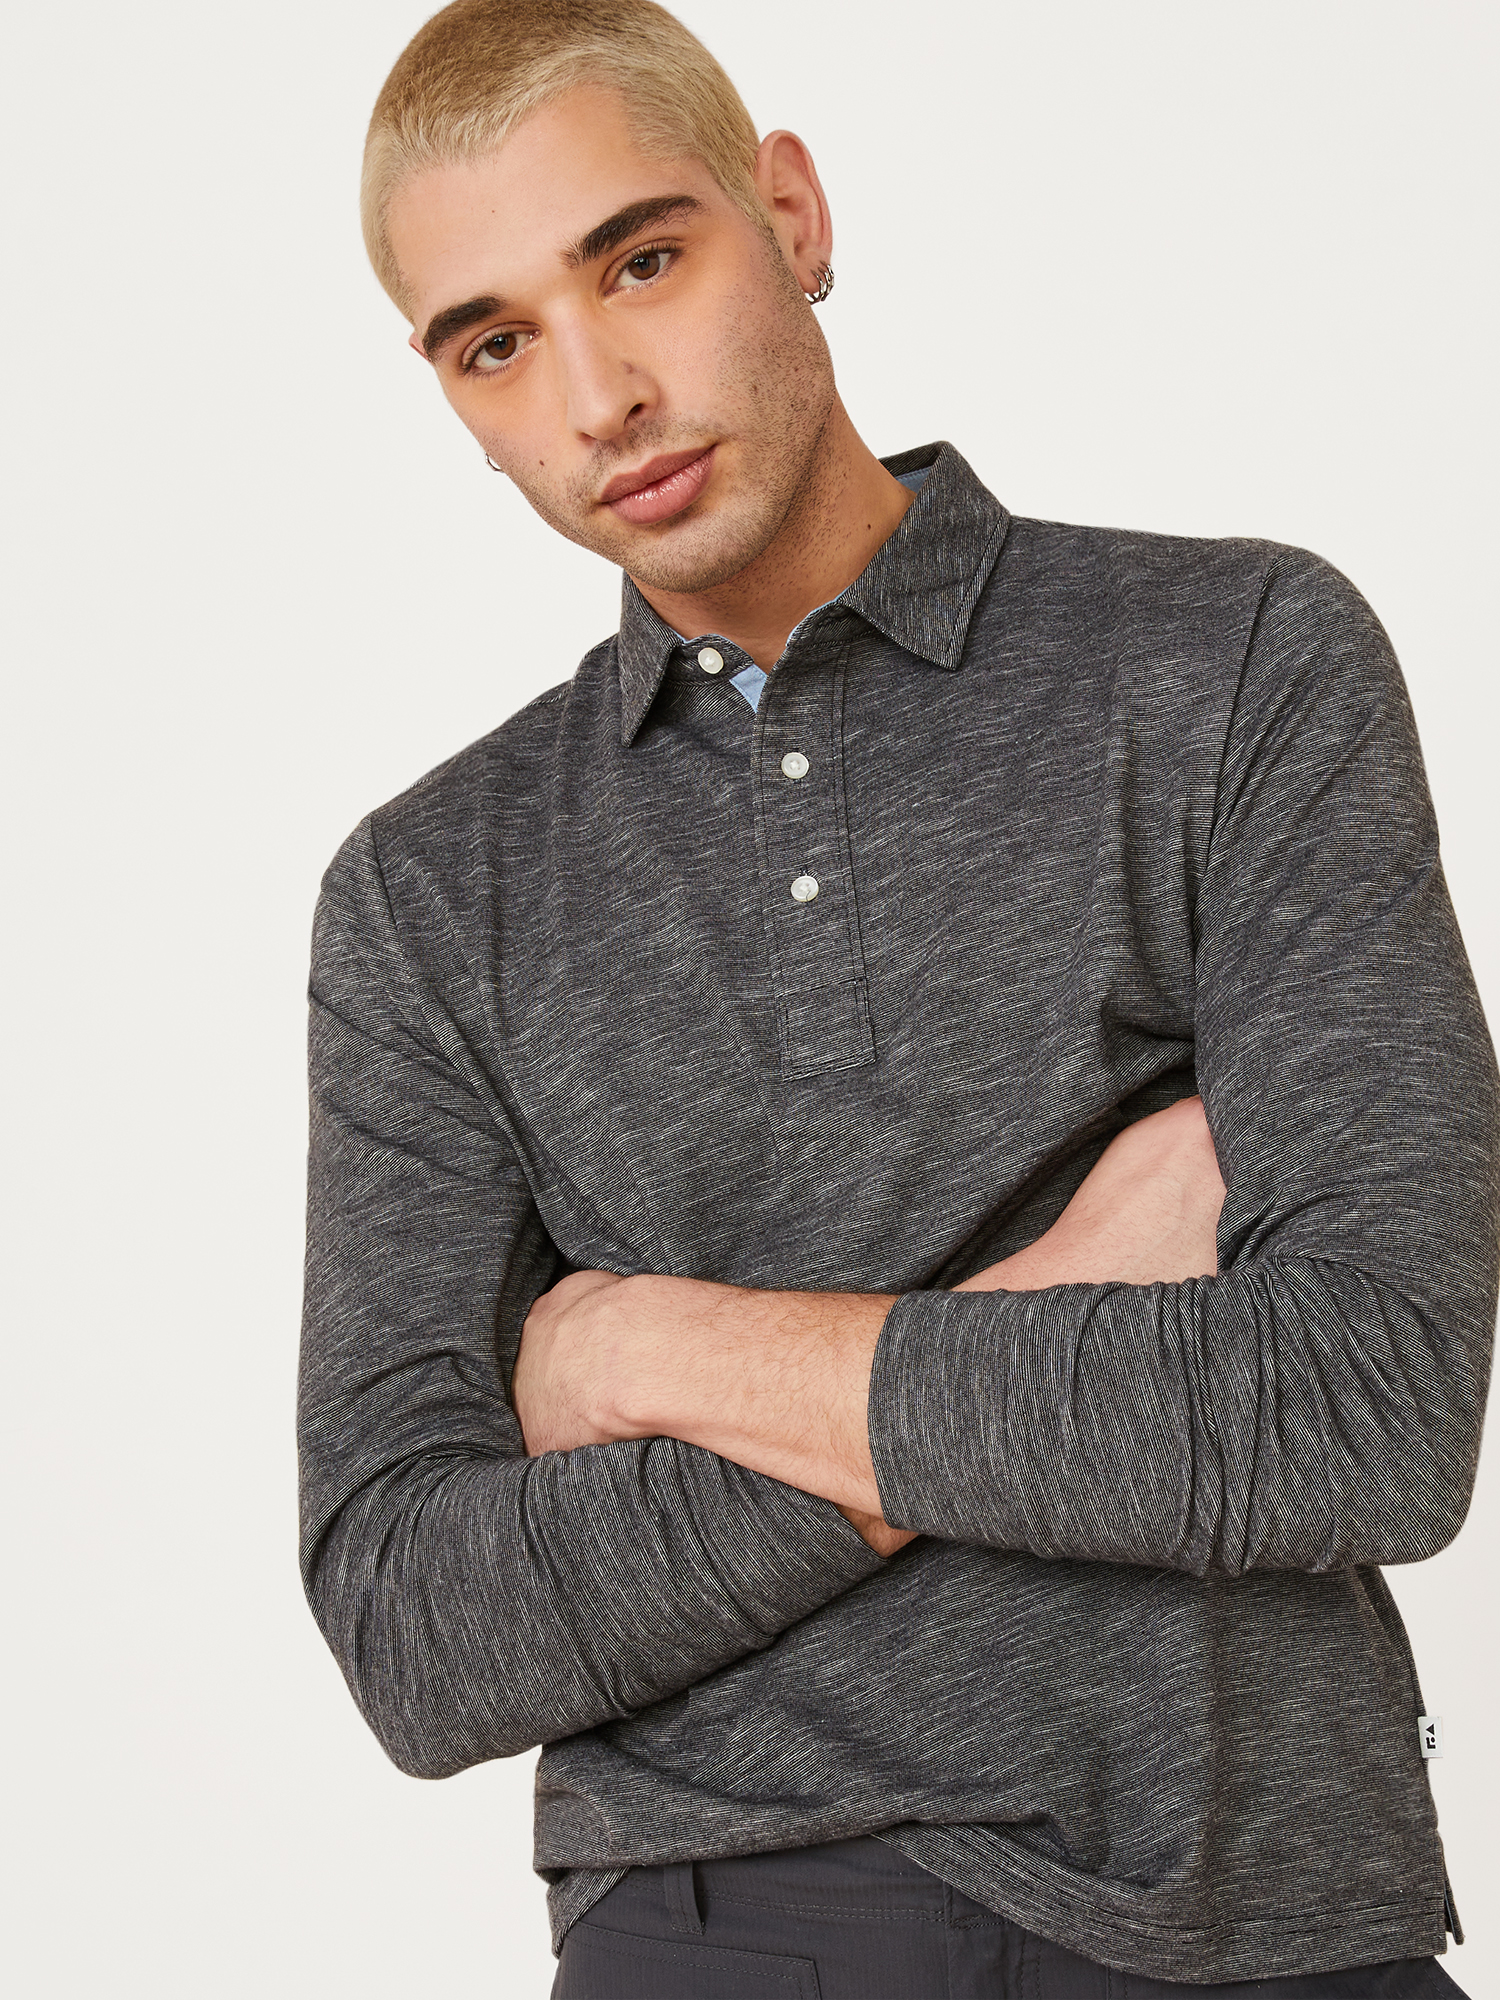 Free Assembly Men's Long Sleeve Textured Jersey Polo Shirt - image 1 of 5